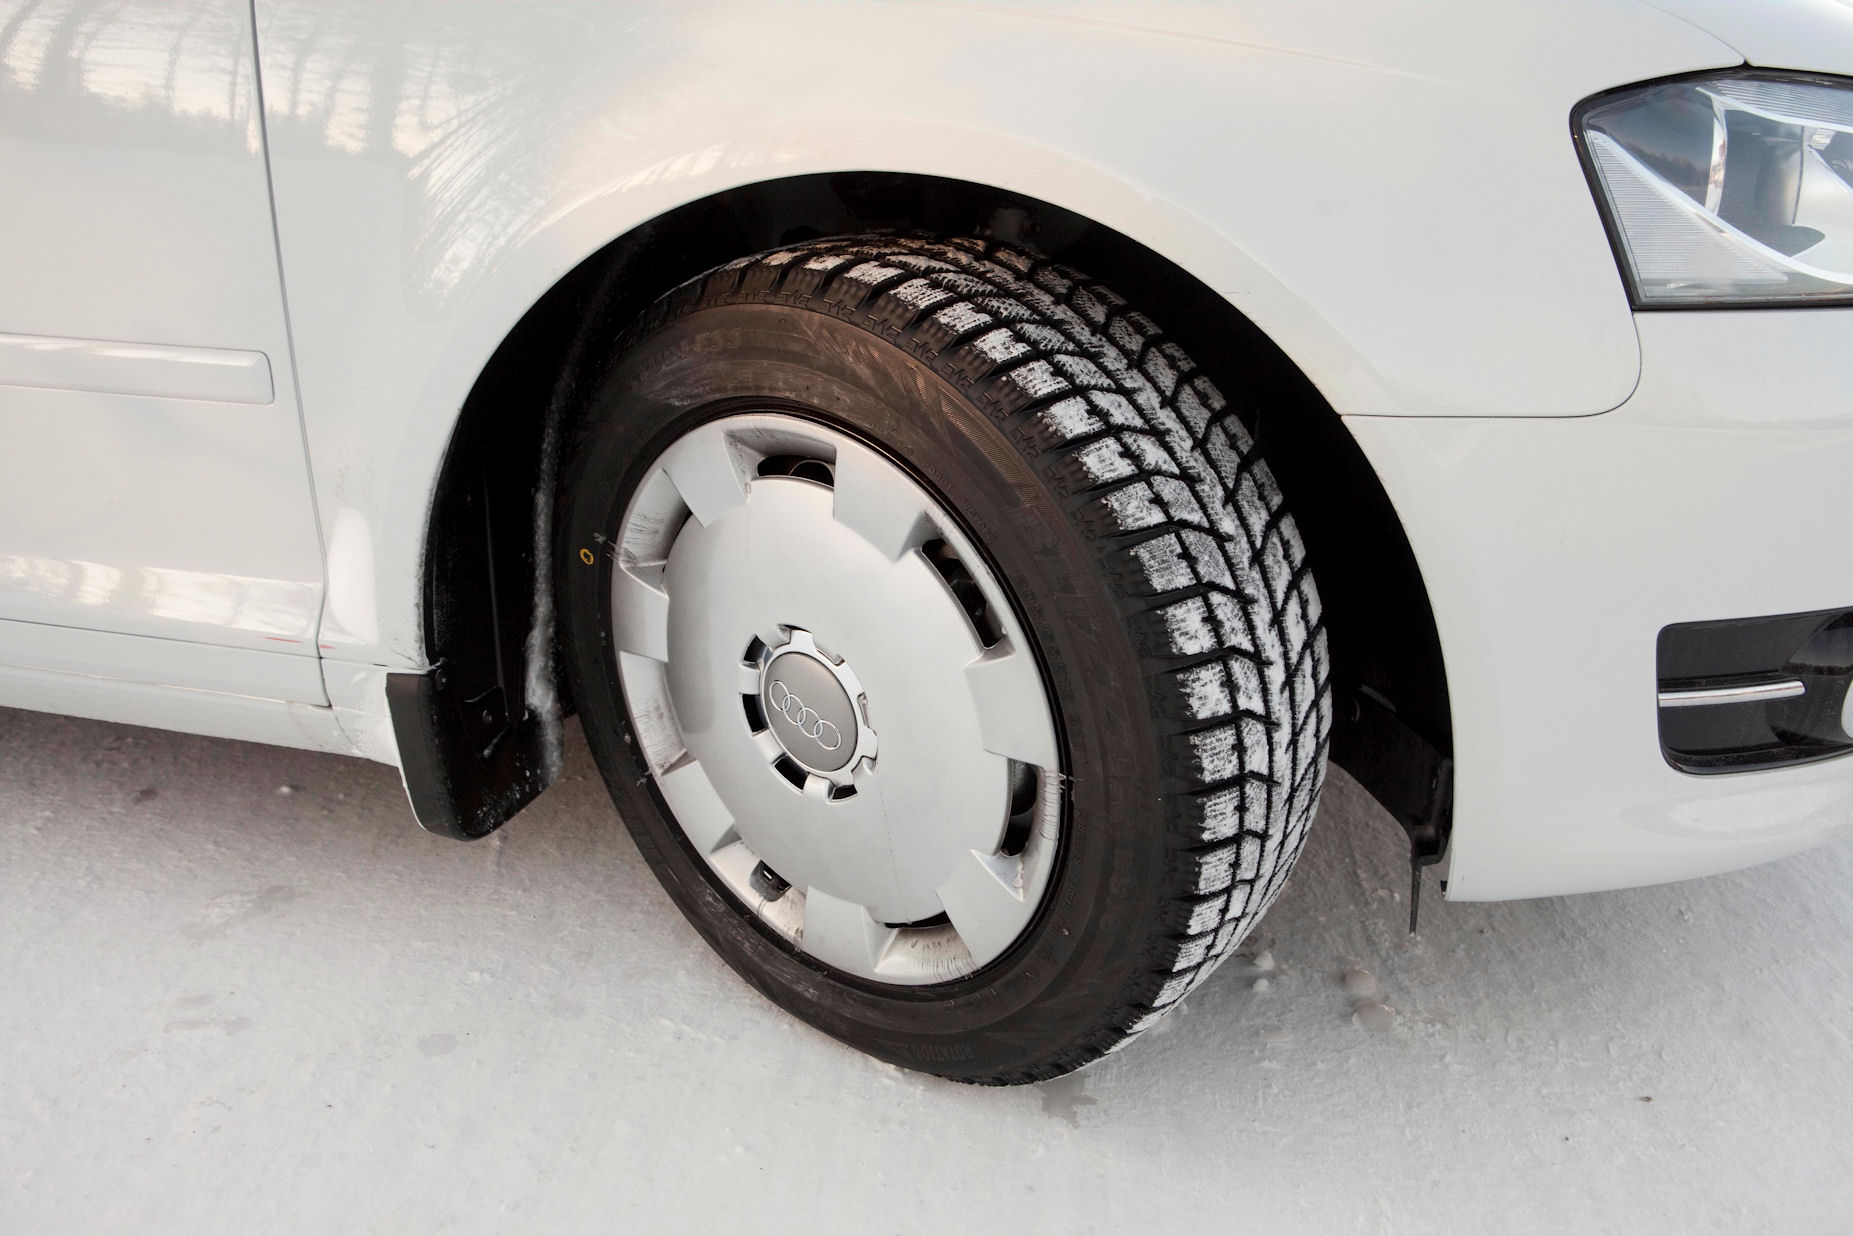 Winter driving needs appropriate driving – and driver behaviour – says Bridgestone MD